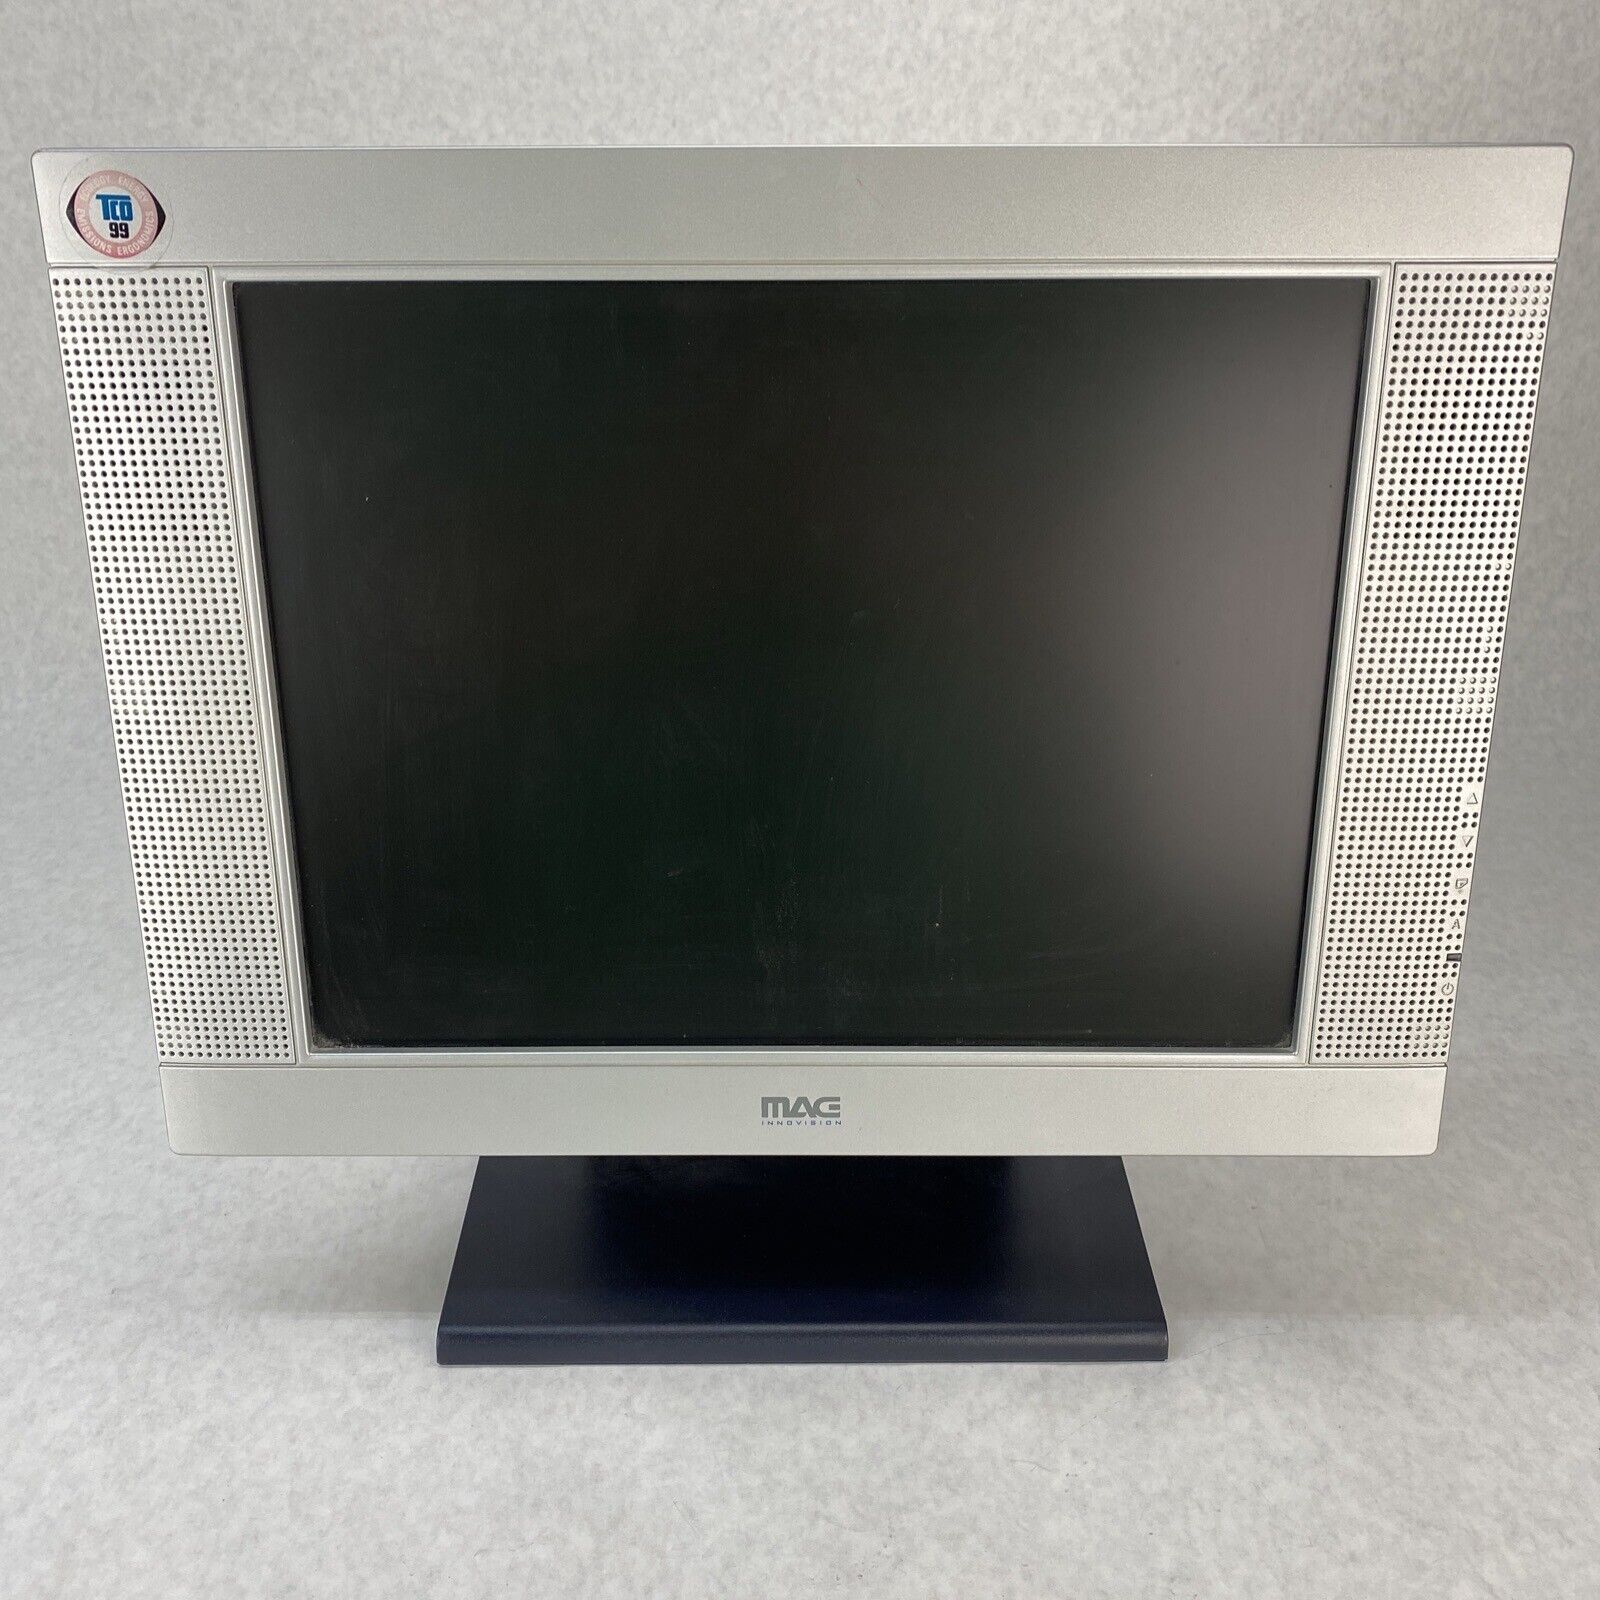 MAG LT565 Innovision 15 Inch LCD Monitor 568 with Built-In Speakers NO PSU